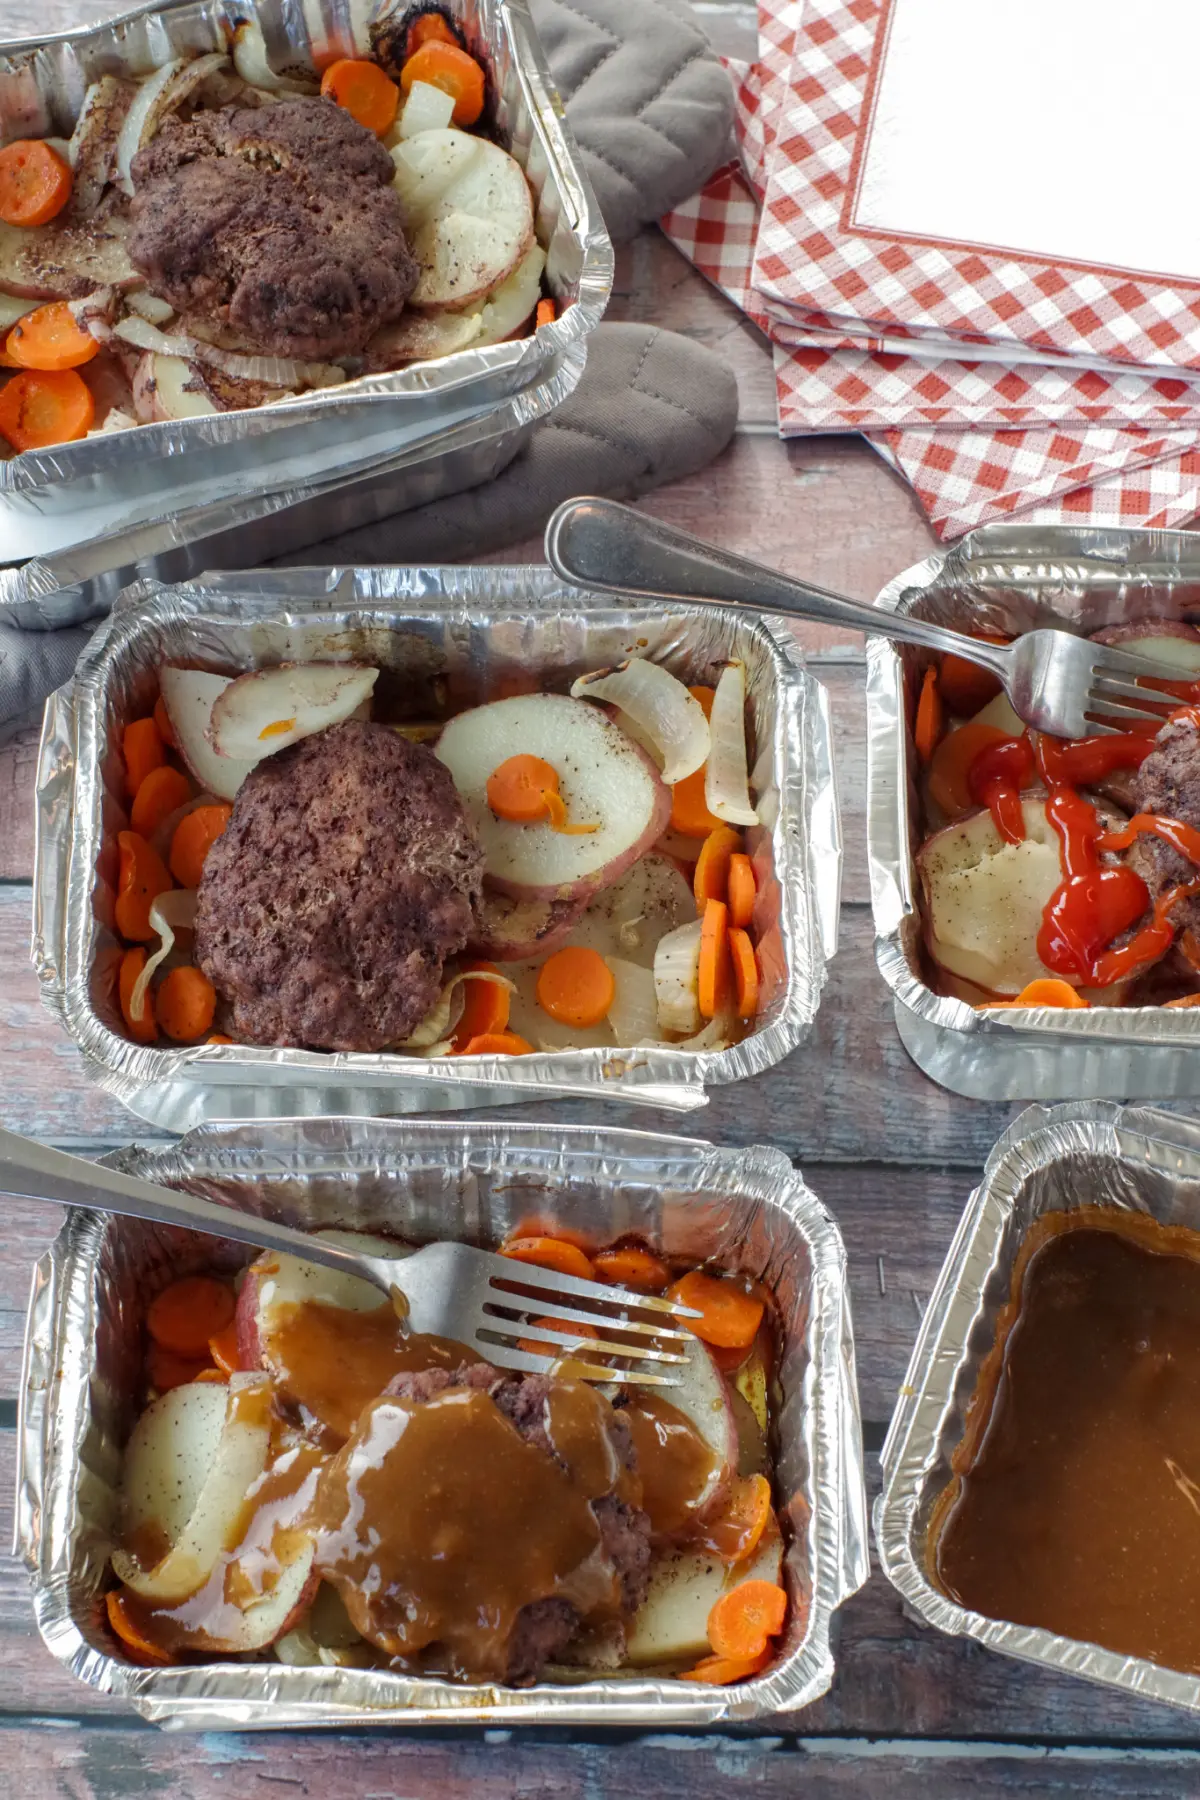 4 hamburger foil packets in aluminum foil containers with potatoes, carrots, onions and hamburgers, on wooden surface